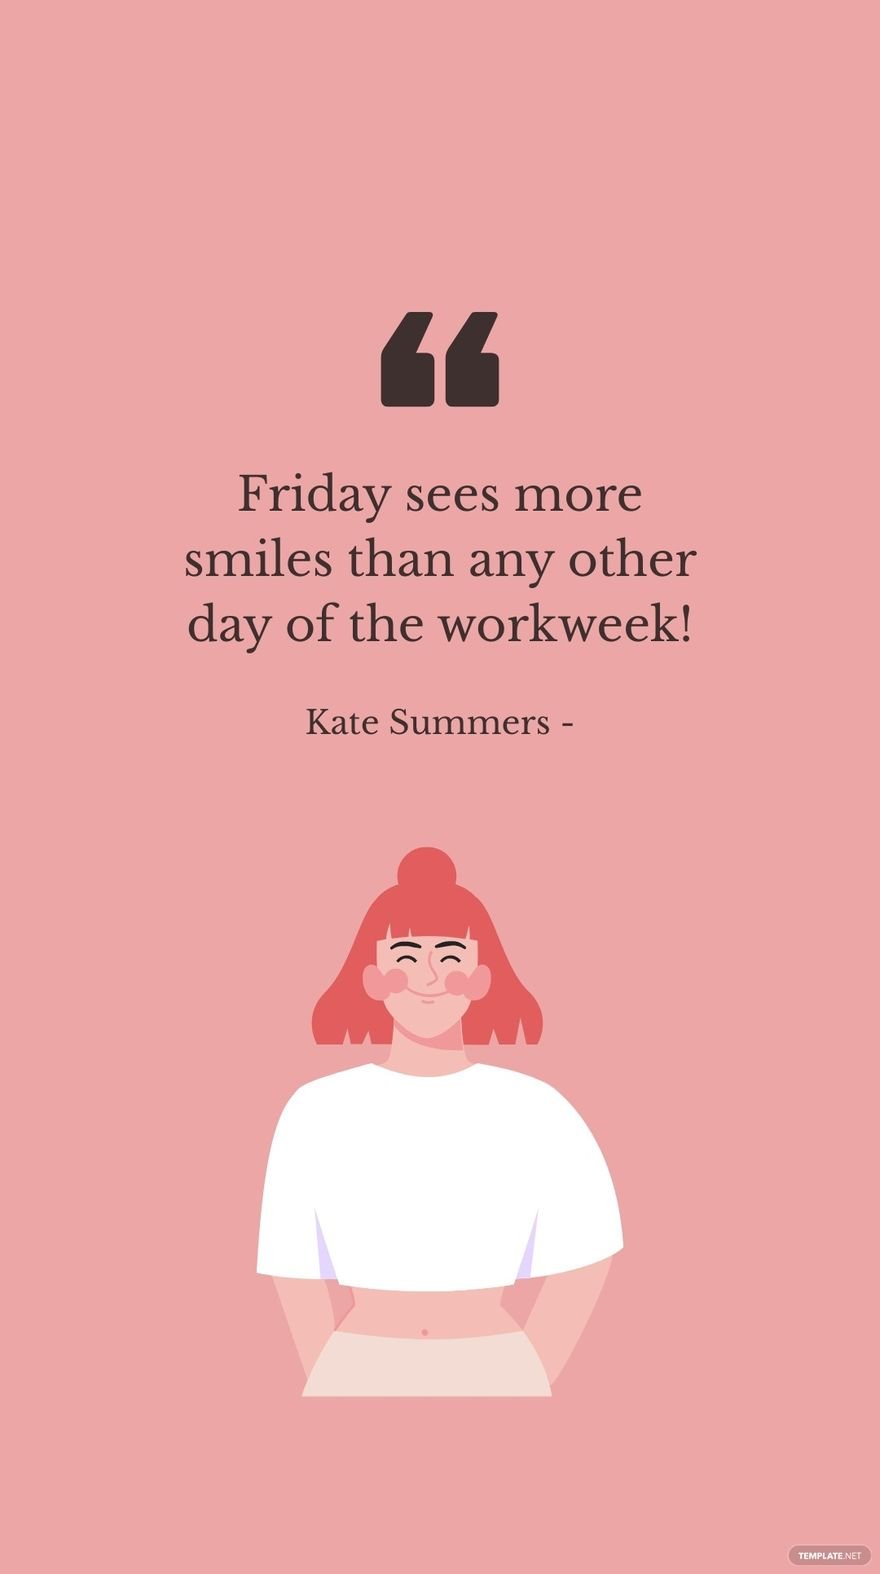 Free Kate Summers - Friday sees more smiles than any other day of the workweek! in JPG